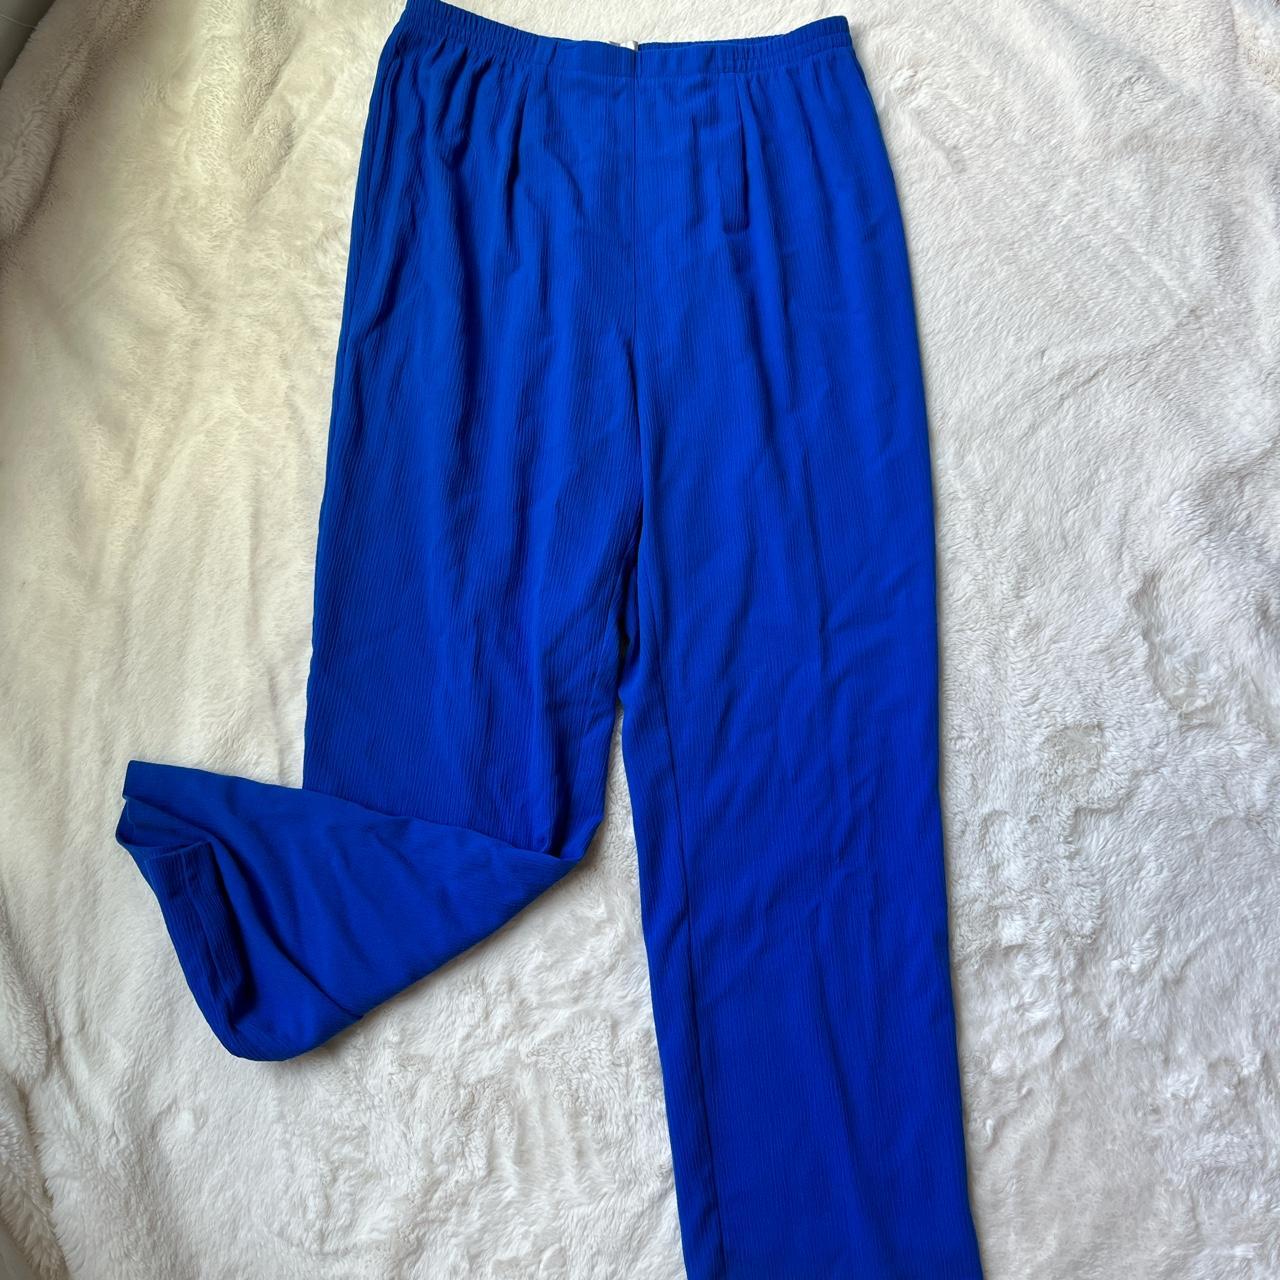 Royal Blue Pants Perfect to wear to work or relaxing - Depop